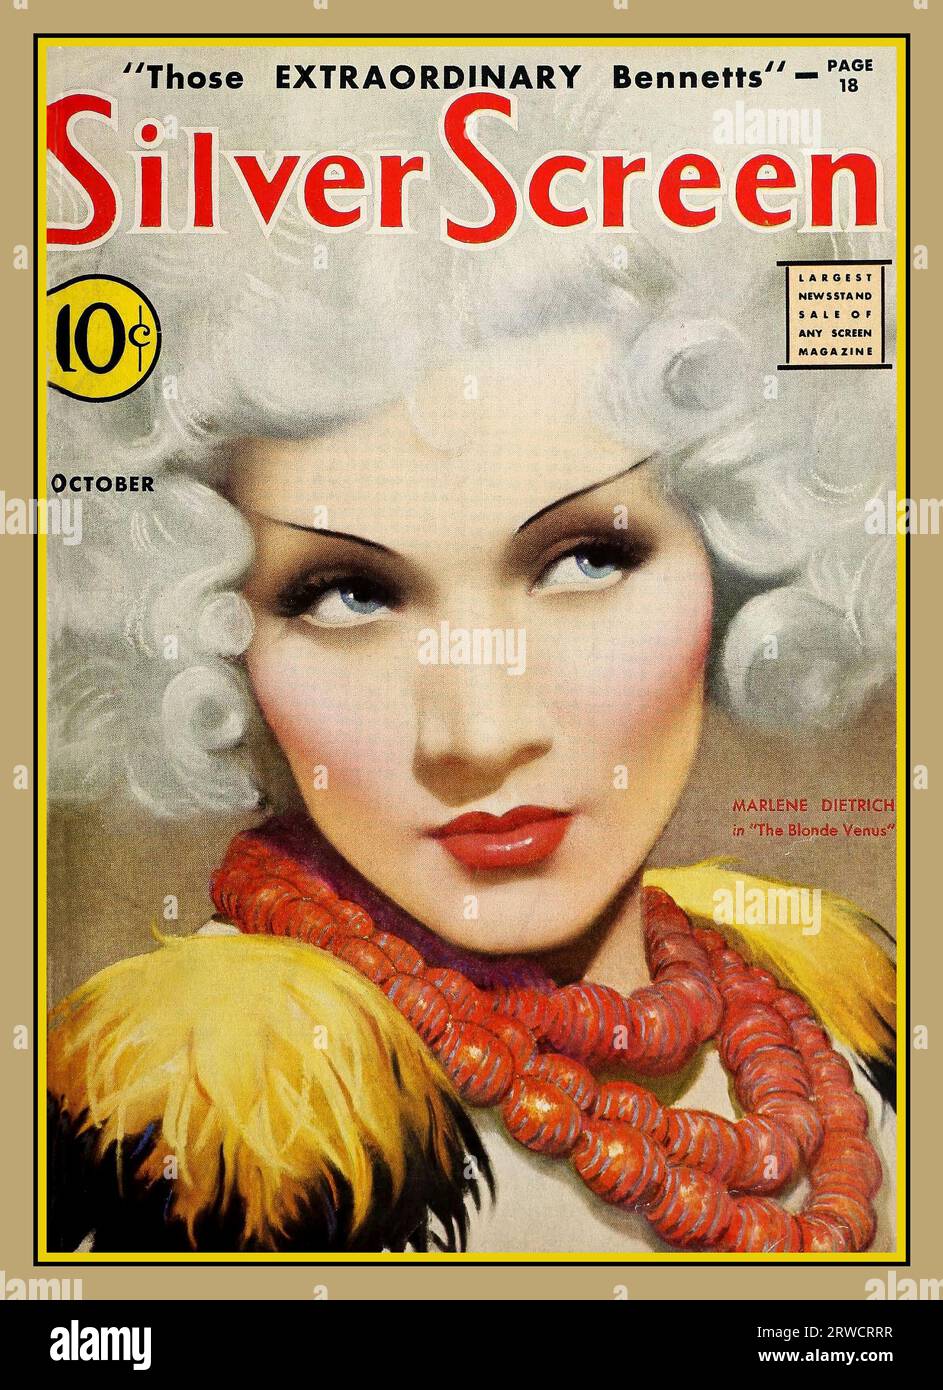 Marlene Dietrich 1930s colour Hollywood Magazine SILVER SCREEN with Marlene Dietrich on the front cover in the movie film 'The Blonde Venus' Hollywood USA Blonde Venus is a 1932 American pre-Code drama film starring Marlene Dietrich, Herbert Marshall and Cary Grant. It was produced, edited and directed by Josef von Sternberg from a screenplay by Jules Furthman and S. K. Lauren, adapted from a story by Furthman and von Sternberg. The original story "Mother Love" was written by Dietrich herself. The musical score was by W. Franke Harling, John Leipold, Paul Marquardt and Oscar Potoker Stock Photo